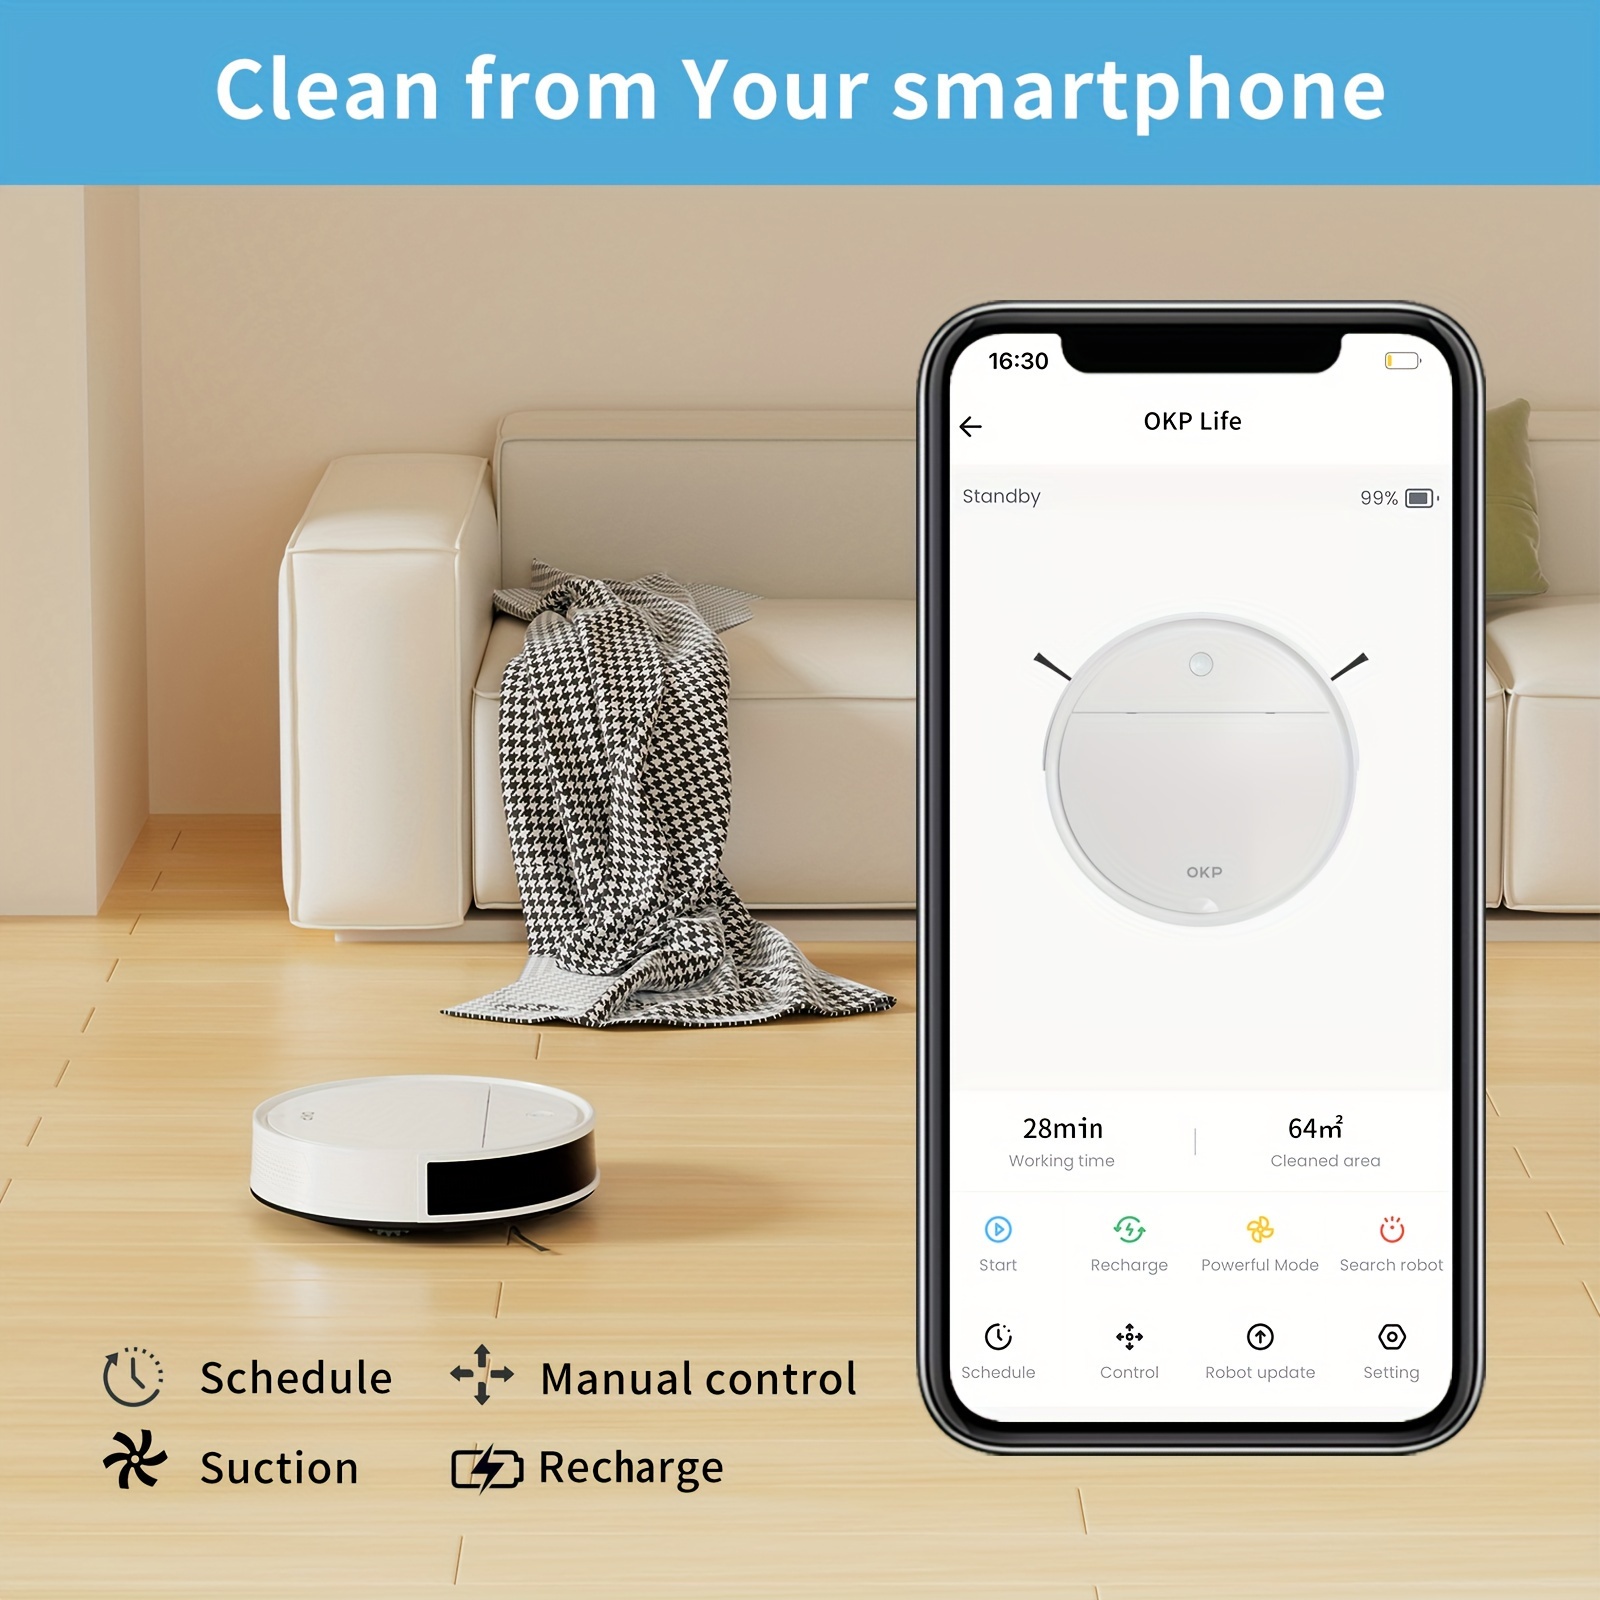 

1pc, Robot Vacuum And Mop Holder, Super Thin, Low Noise, Self-charging, 2 In 1 Cleaning And Mopping Robotic Vacuums With Wi-fi/app/alexa Control, Ideal For Pet Hair Carpets Hard Floors, K5 Pro